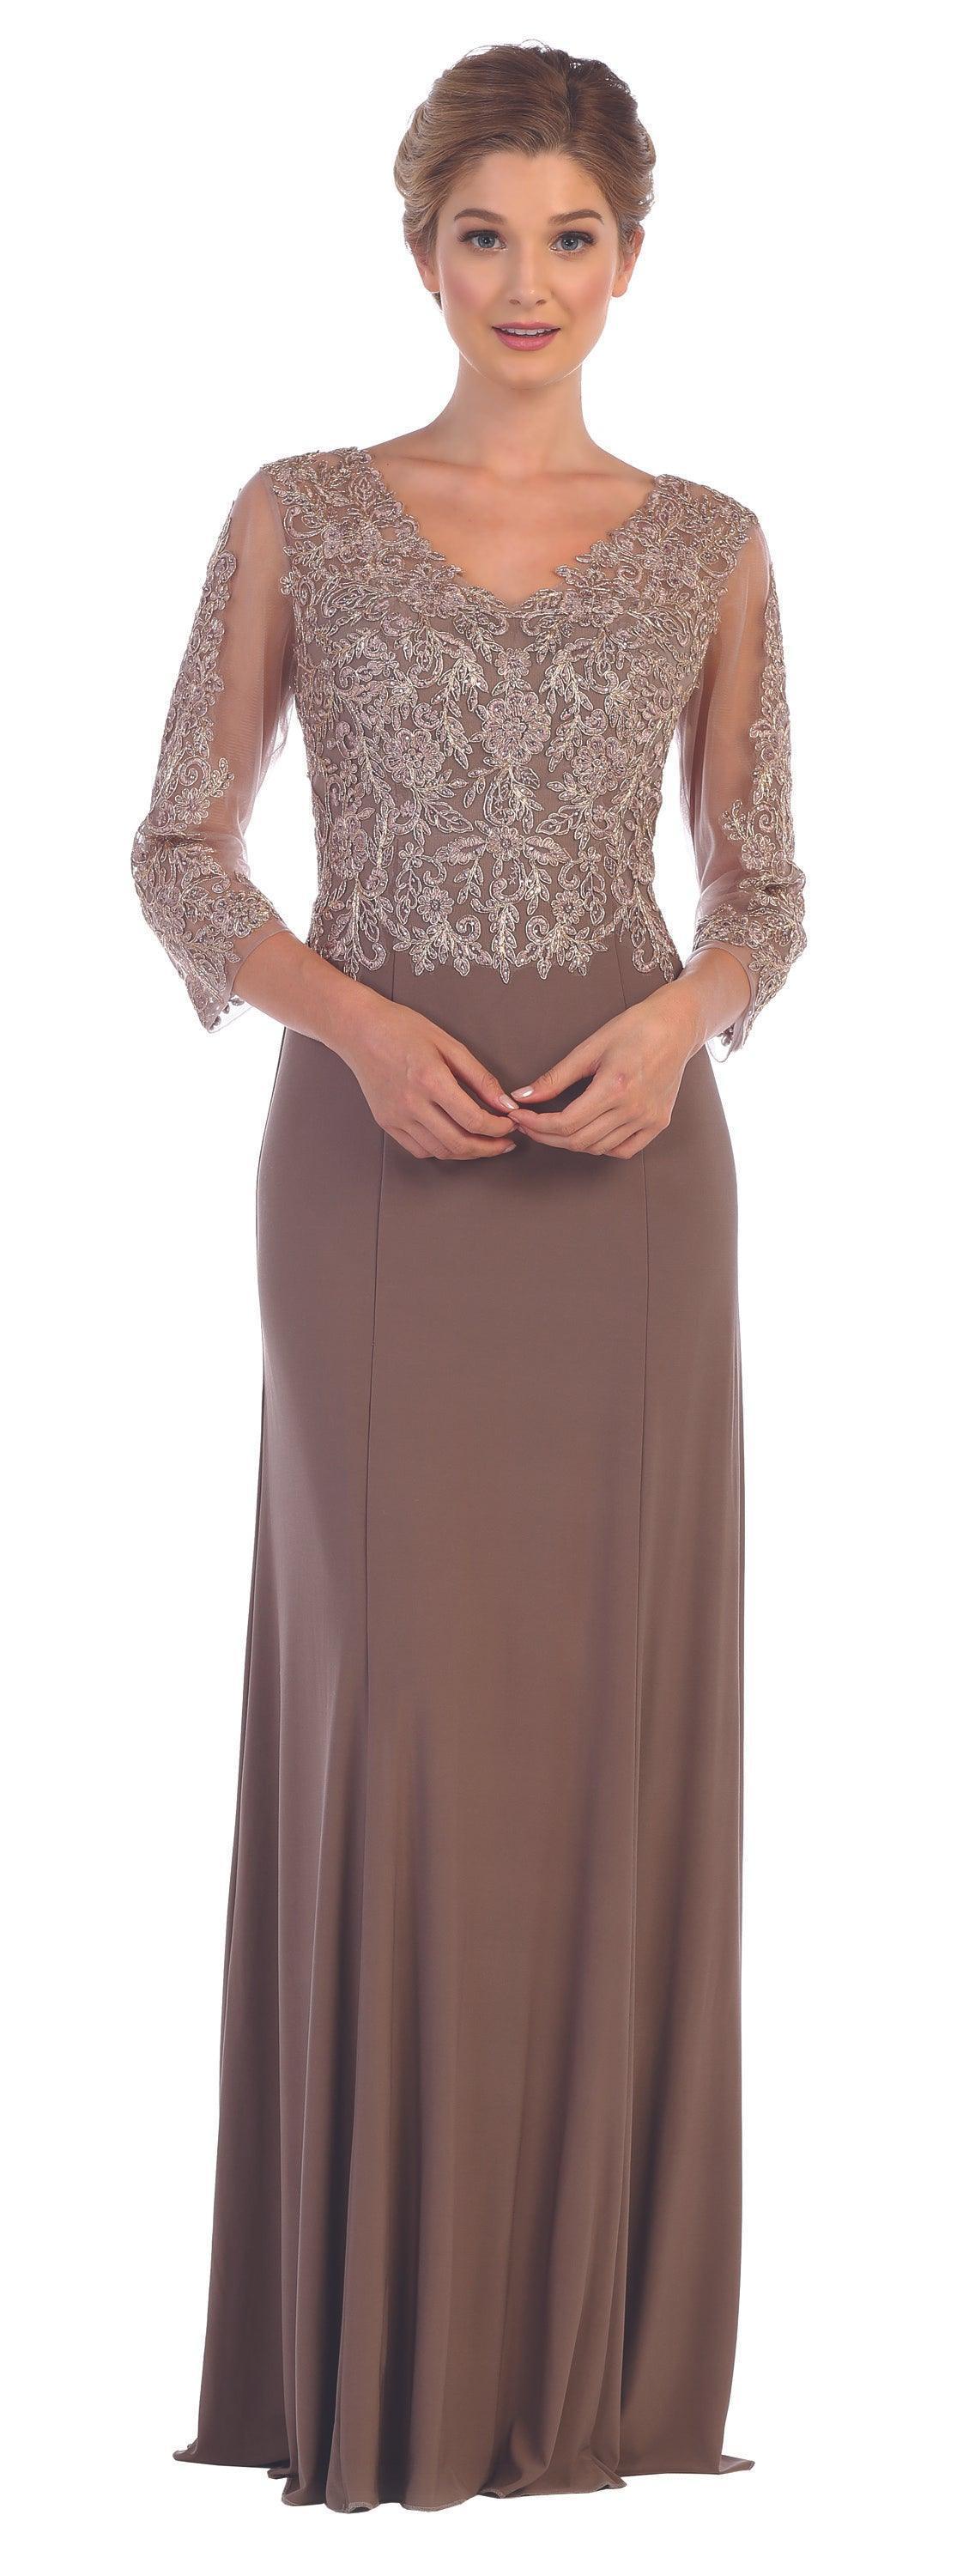 Long Mother of the Bride Long Sleeve Formal Dress Sale - The Dress Outlet